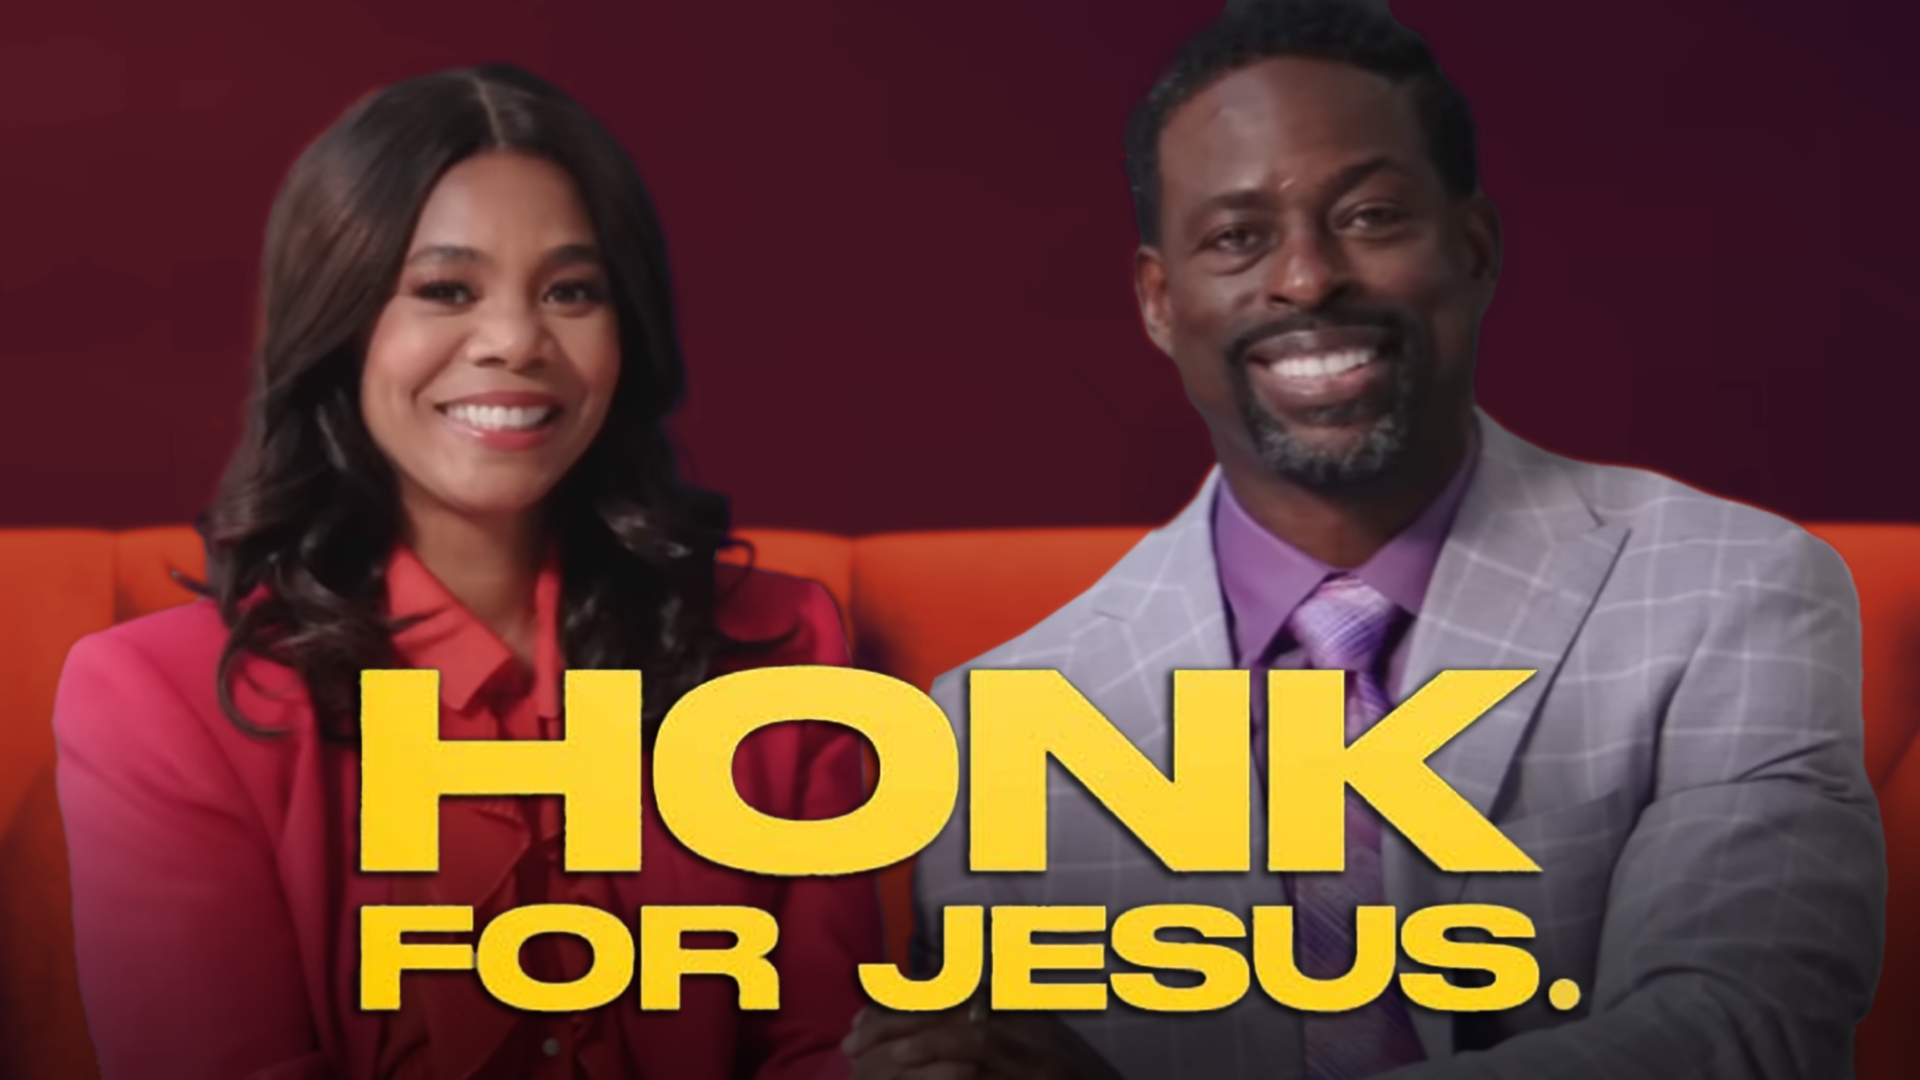 Honk for Jesus. Save Your Soul. Watch this movie.